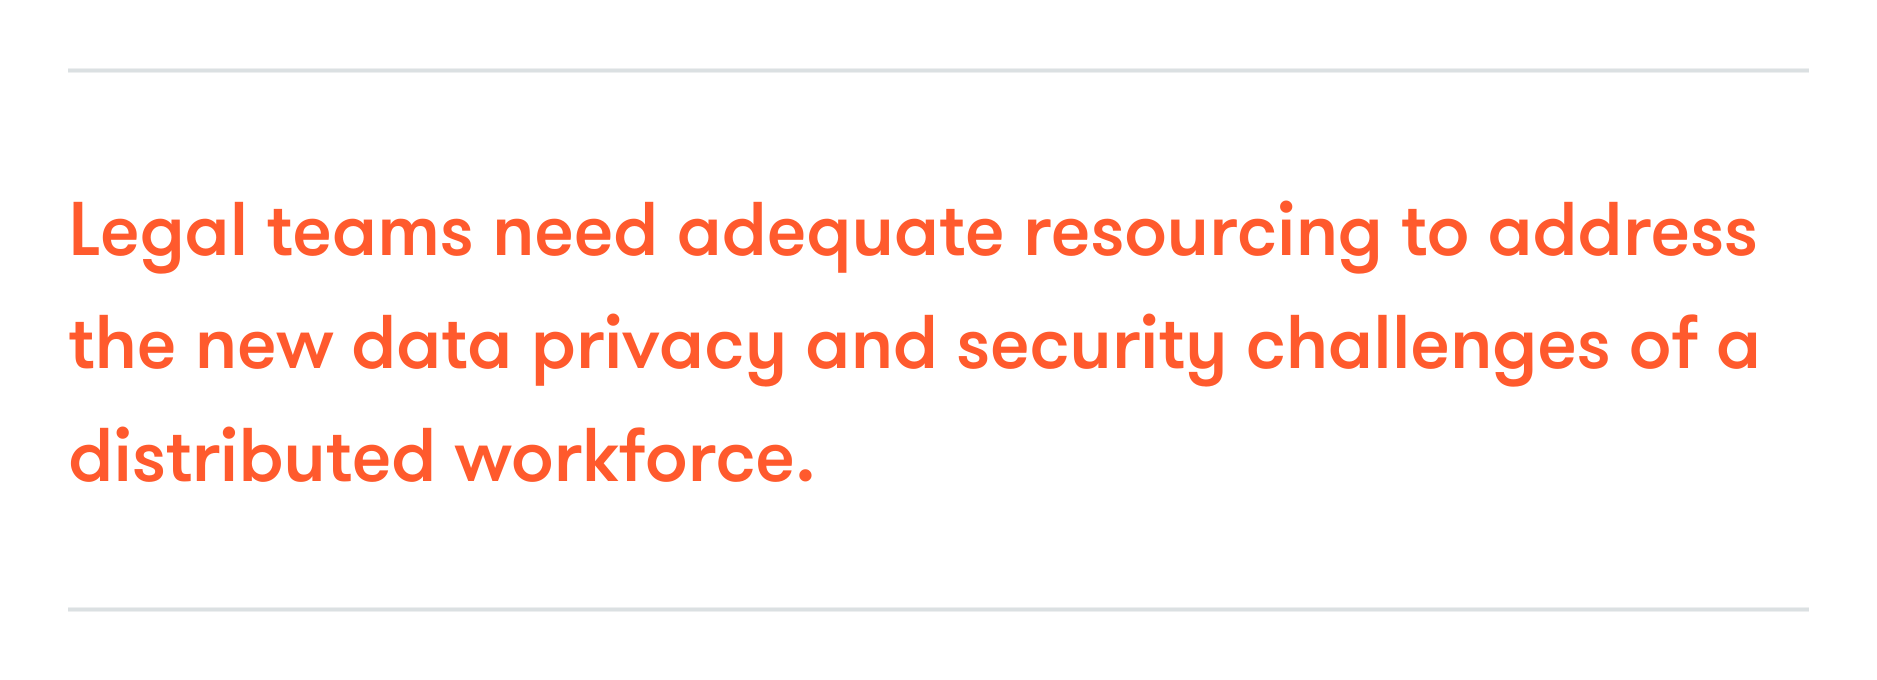 Image of statement which says "Legal teams need adequate resourcing to address the new data privacy and security challenges of a distributed workforce."